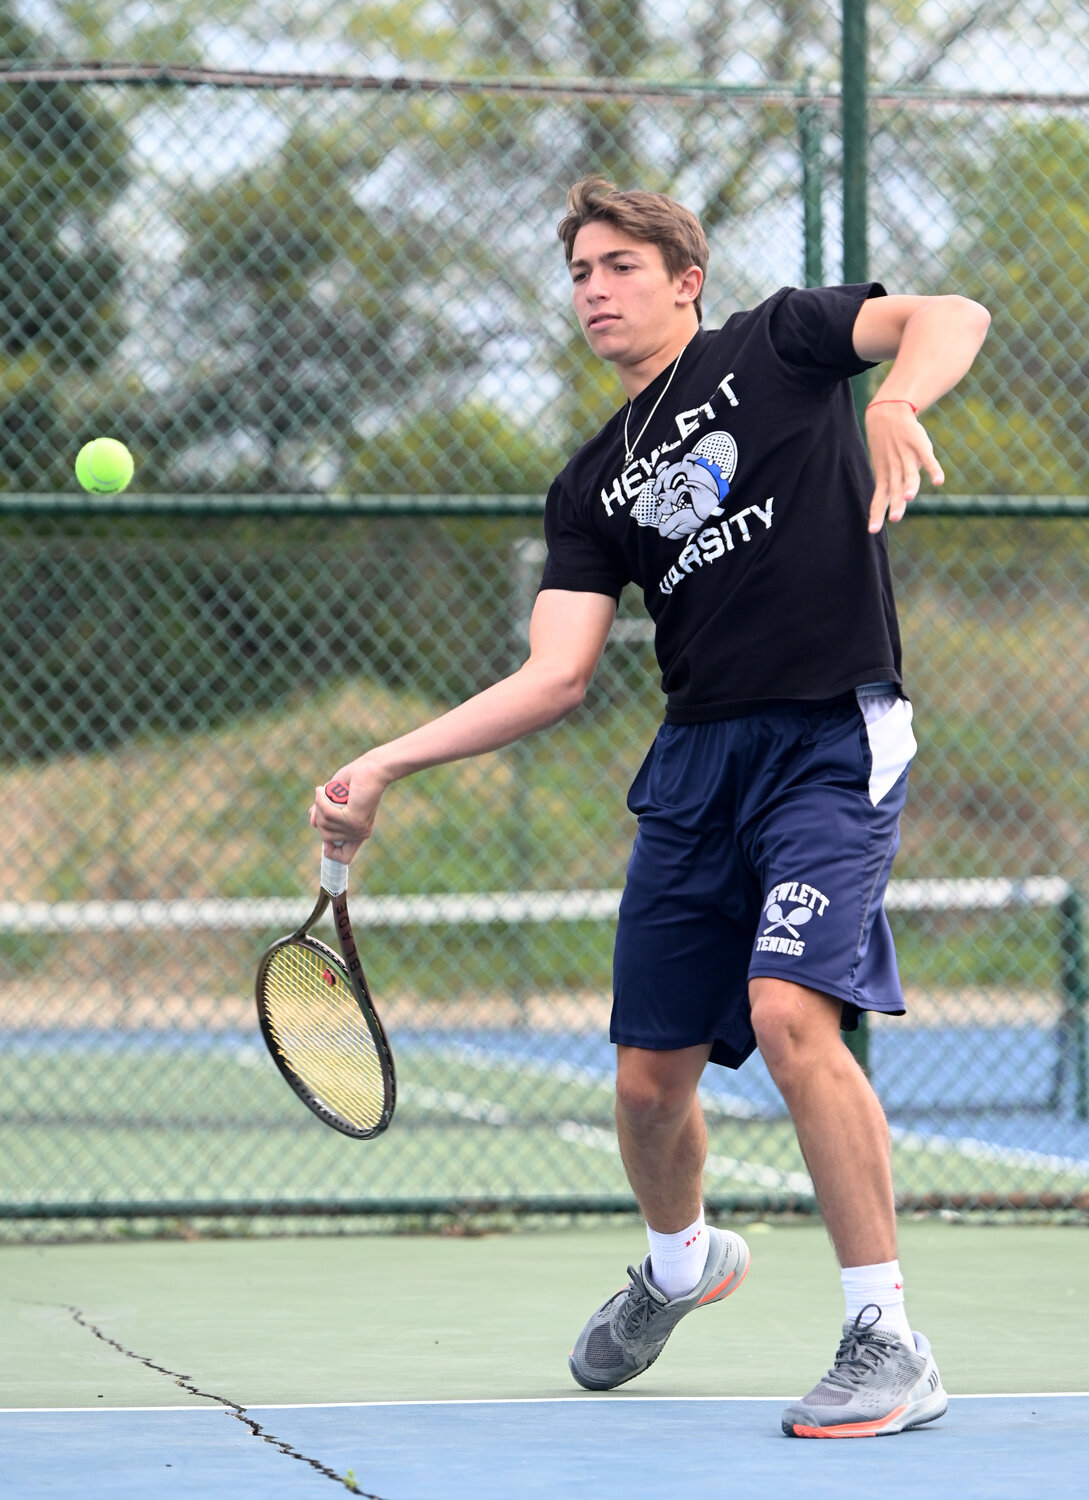 Hewlett senior Stephan Gershfeld overcame adversity and five opponents to win a third straight Nassau County boys’ tennis singles title.